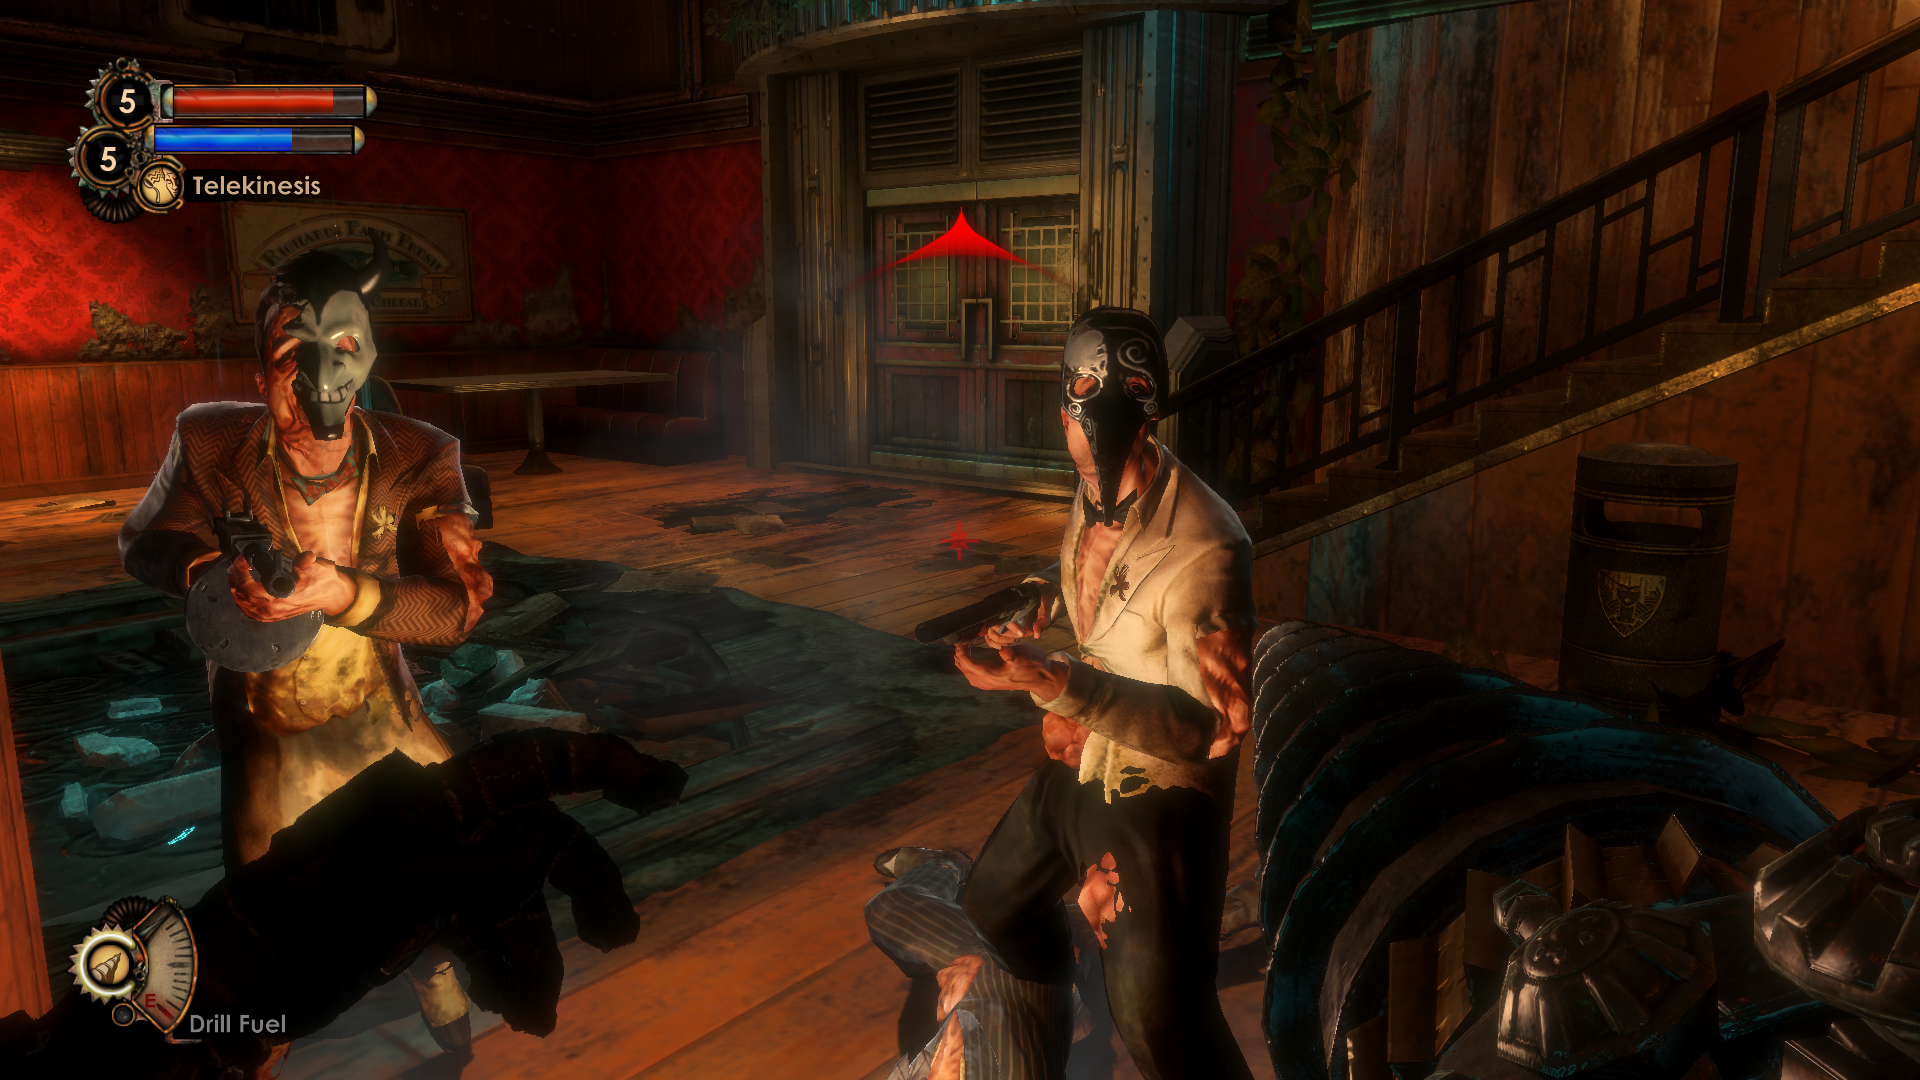 Before they see and attack you, Splicers make noise, indicating their presence to the player